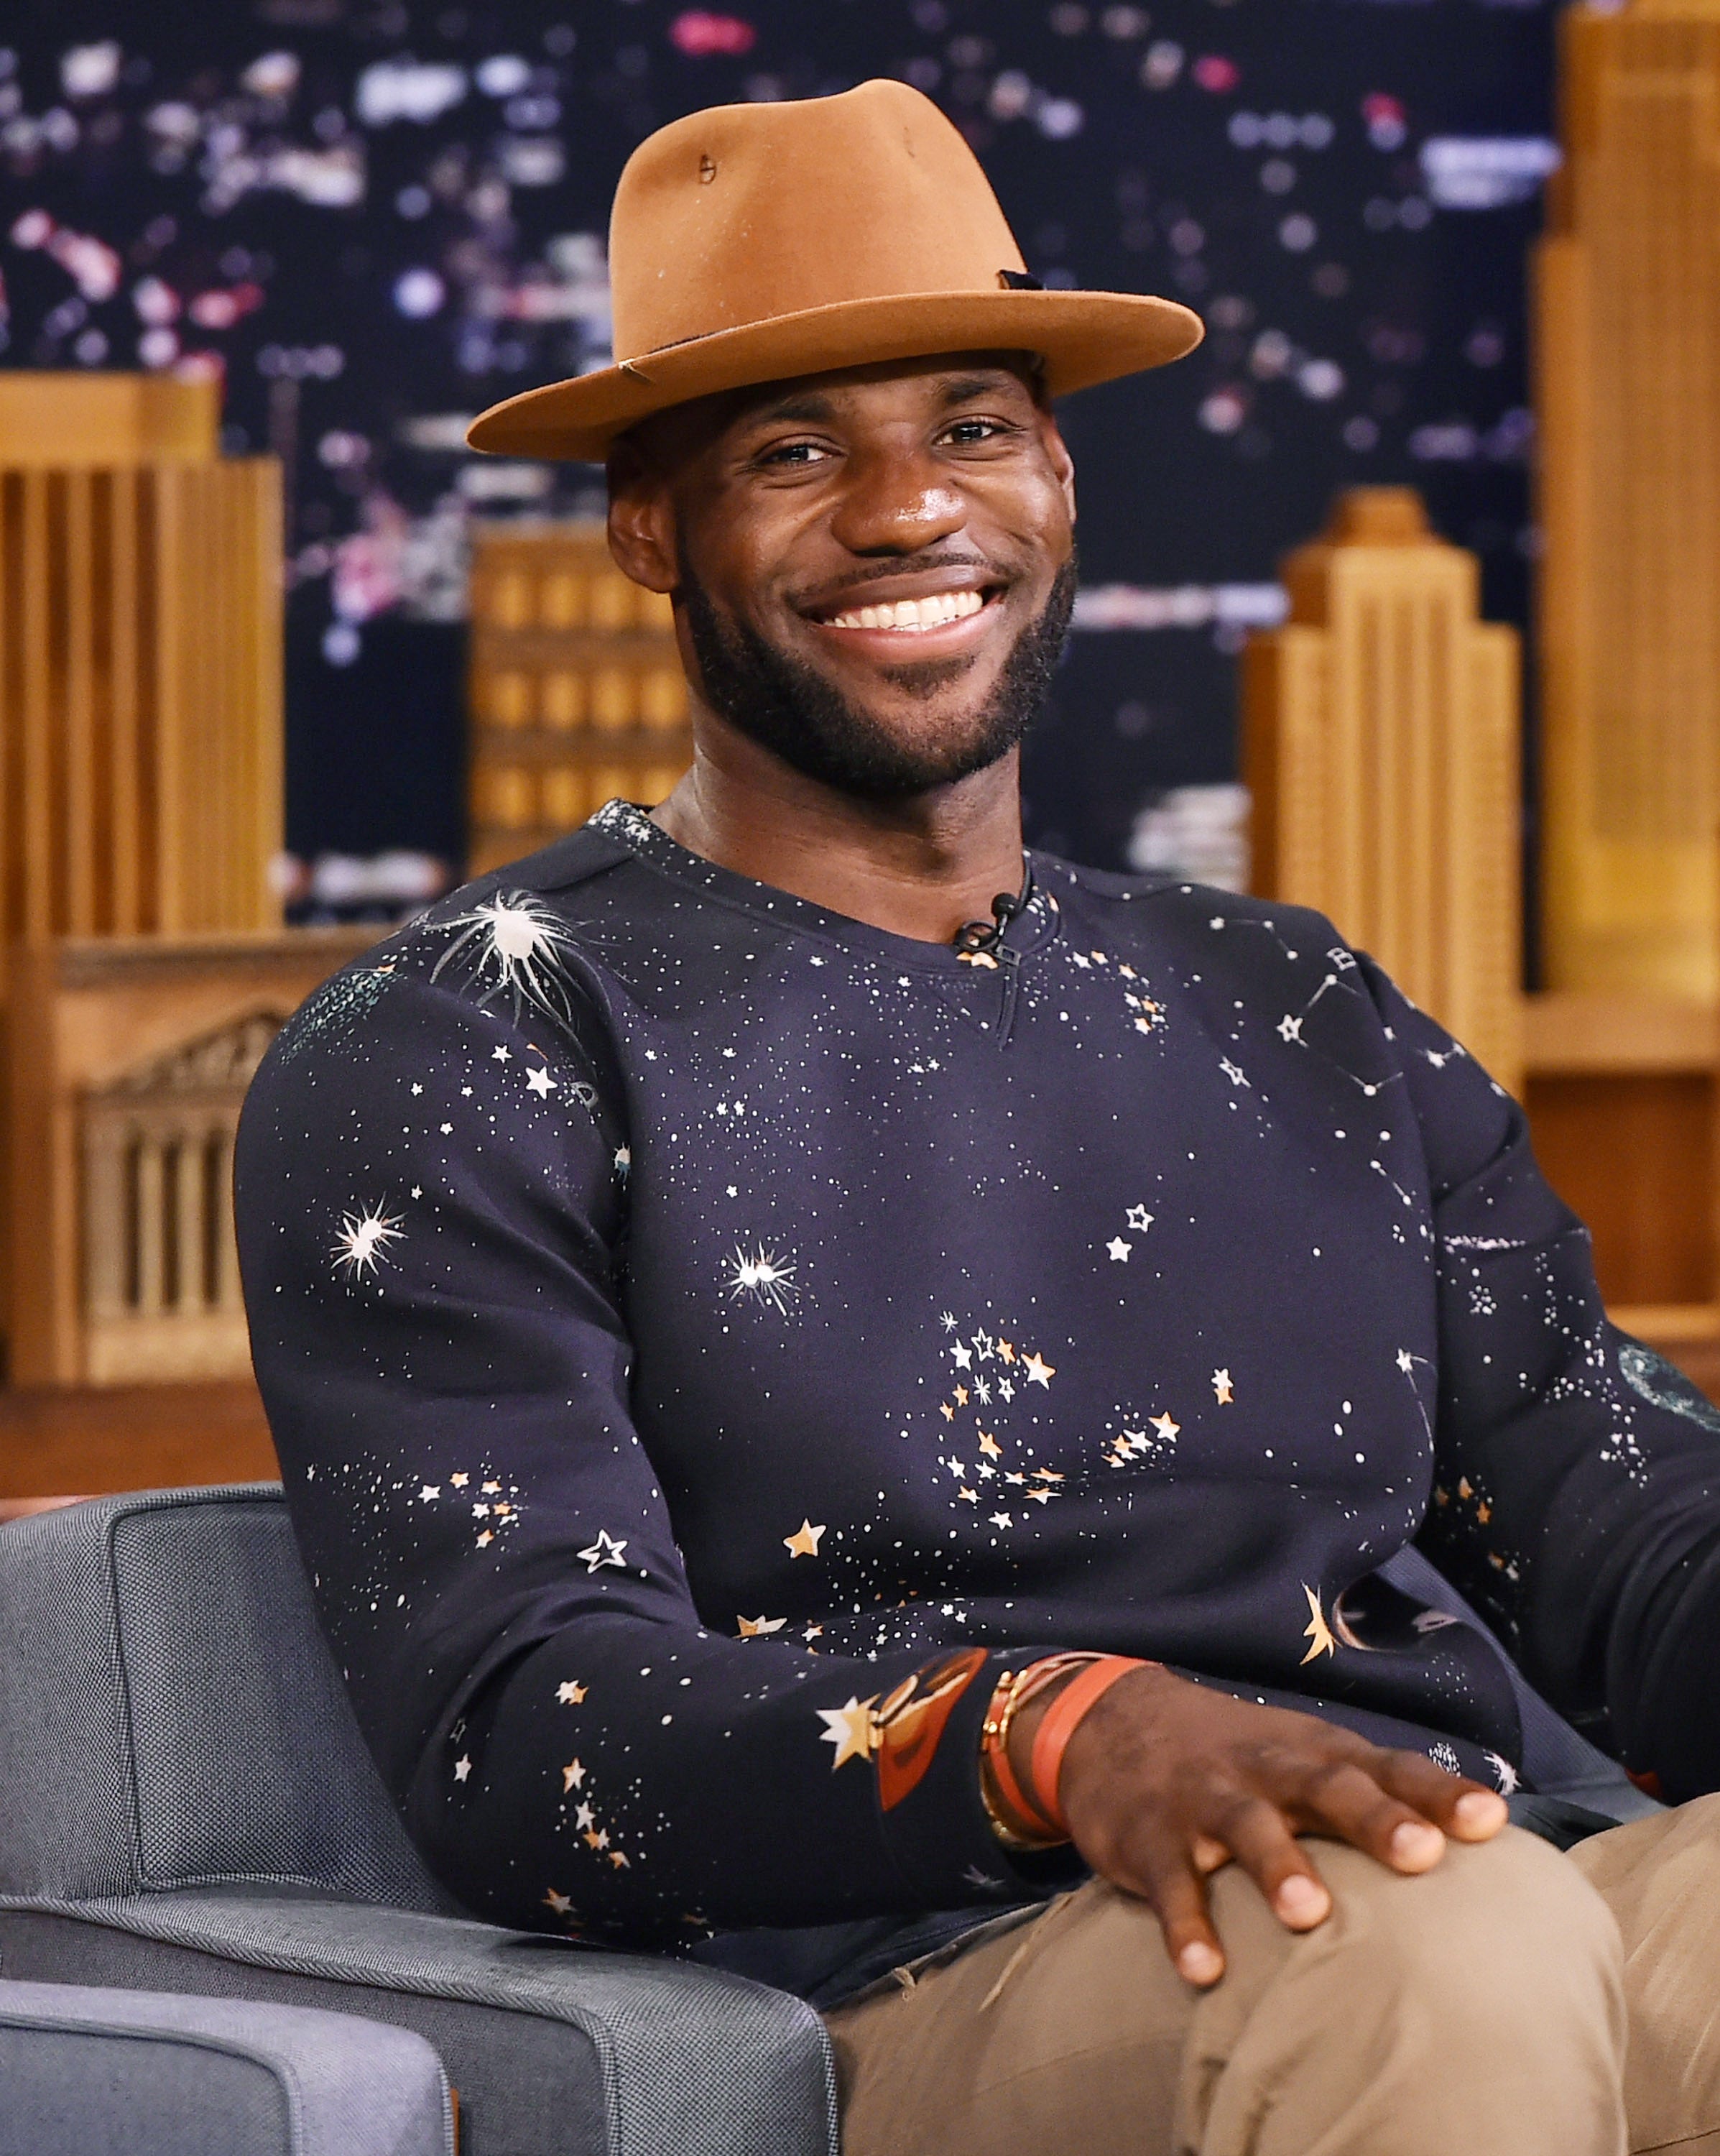 King of Hollywood: LeBron James' 'Shut Up And Dribble' Is Headed To Showtime